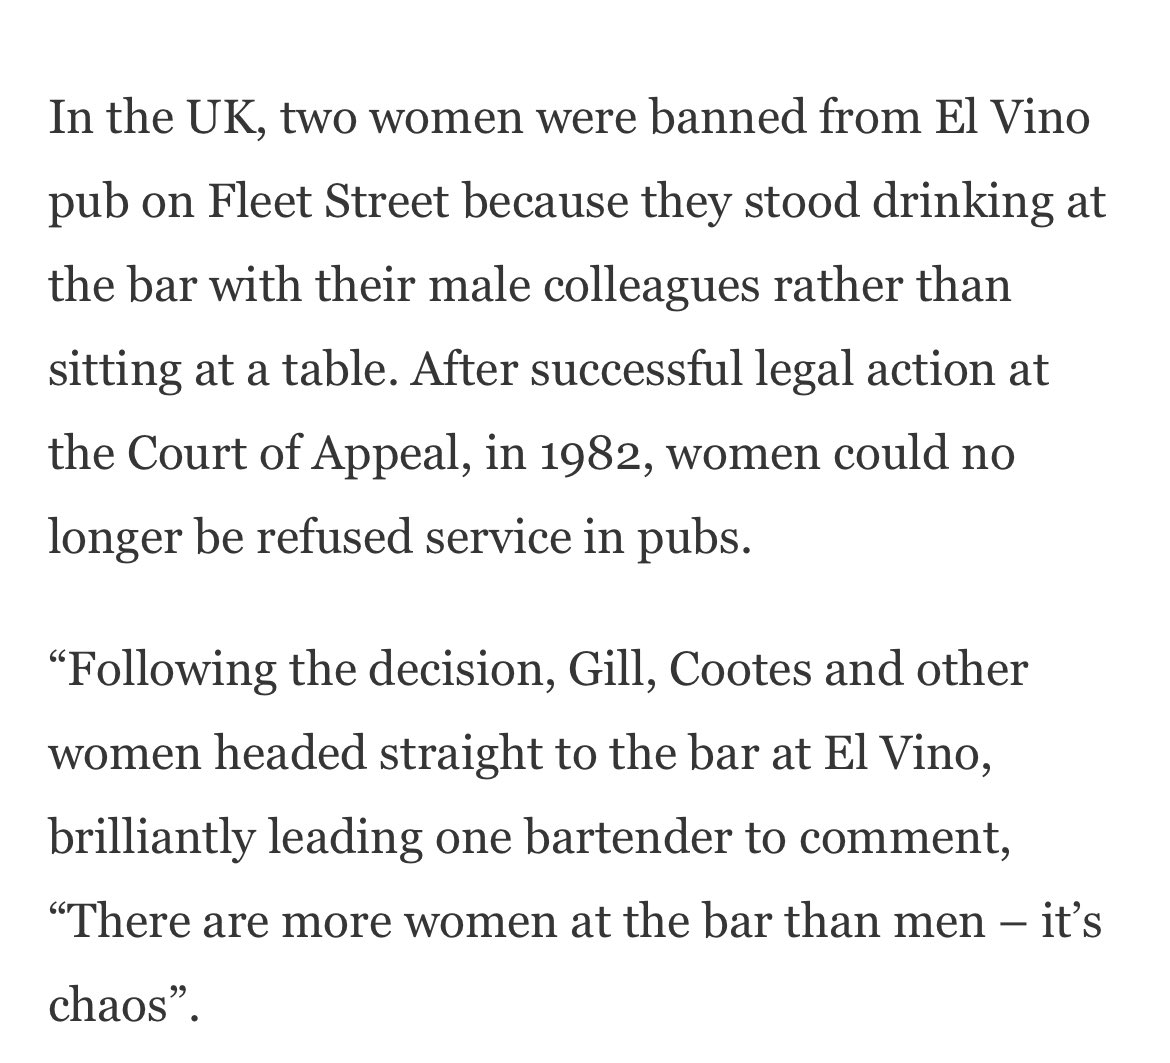 Incredible to think that in 1982 in the UK it was still legal to refuse to serve women in pubs for no reason other than they were women